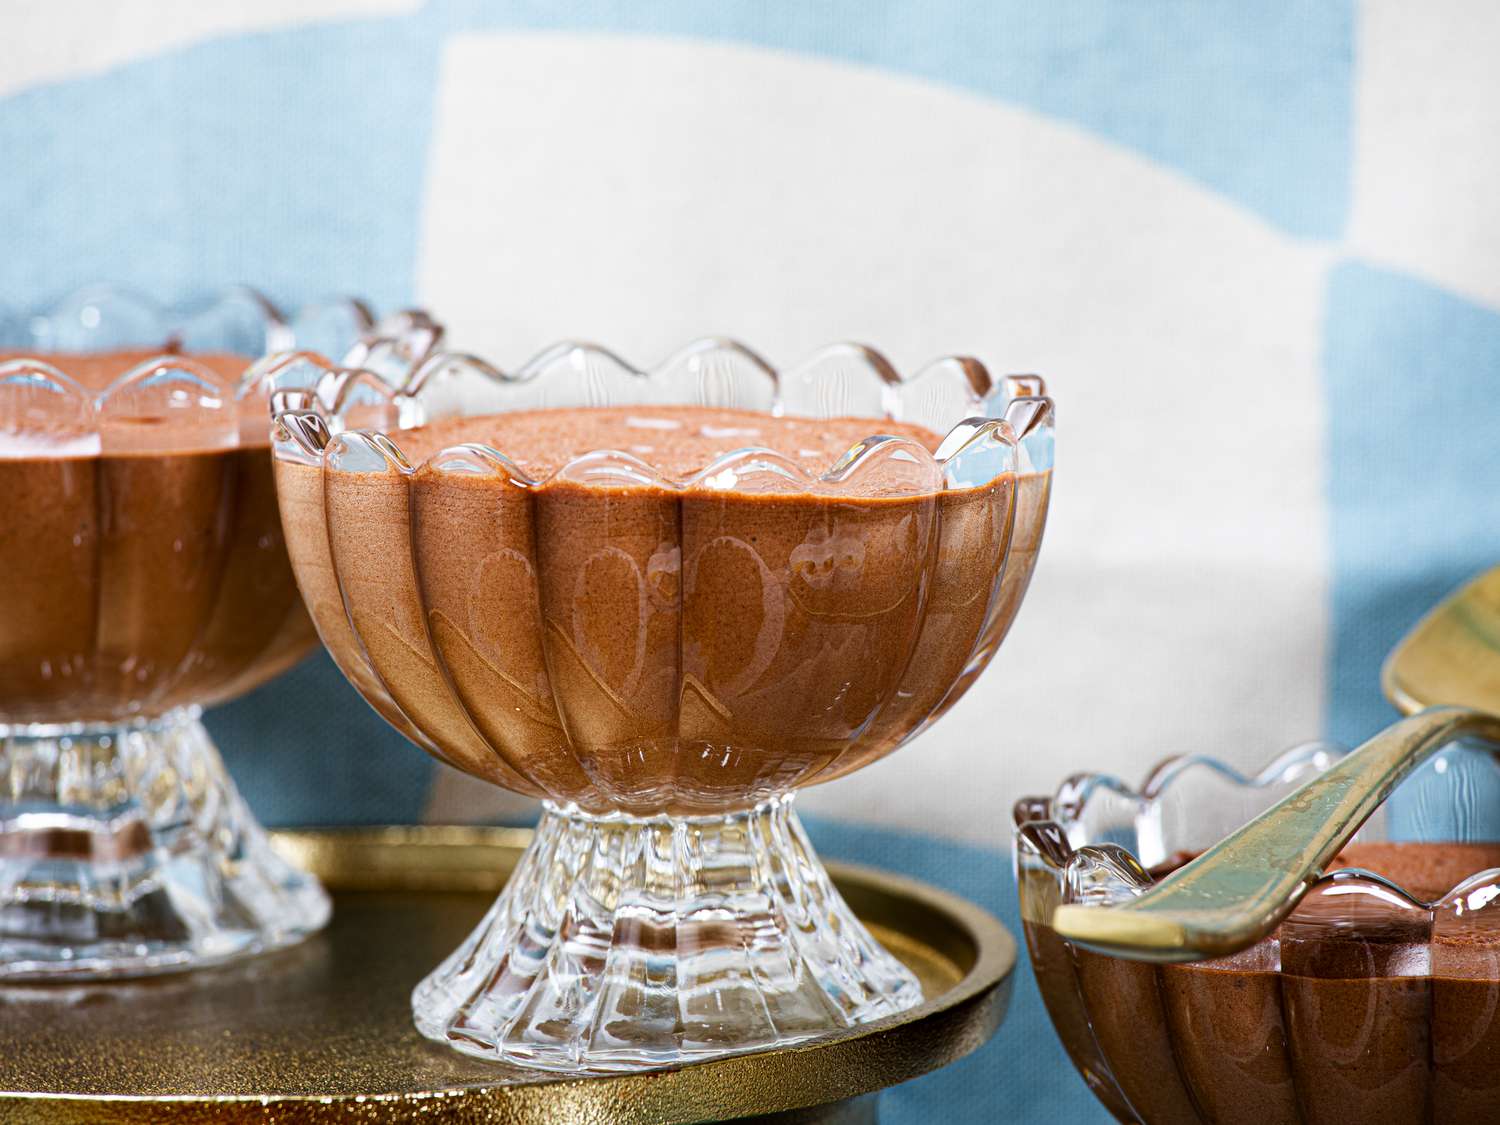 Side angle view of chocolate mousse in glass dessert bowls